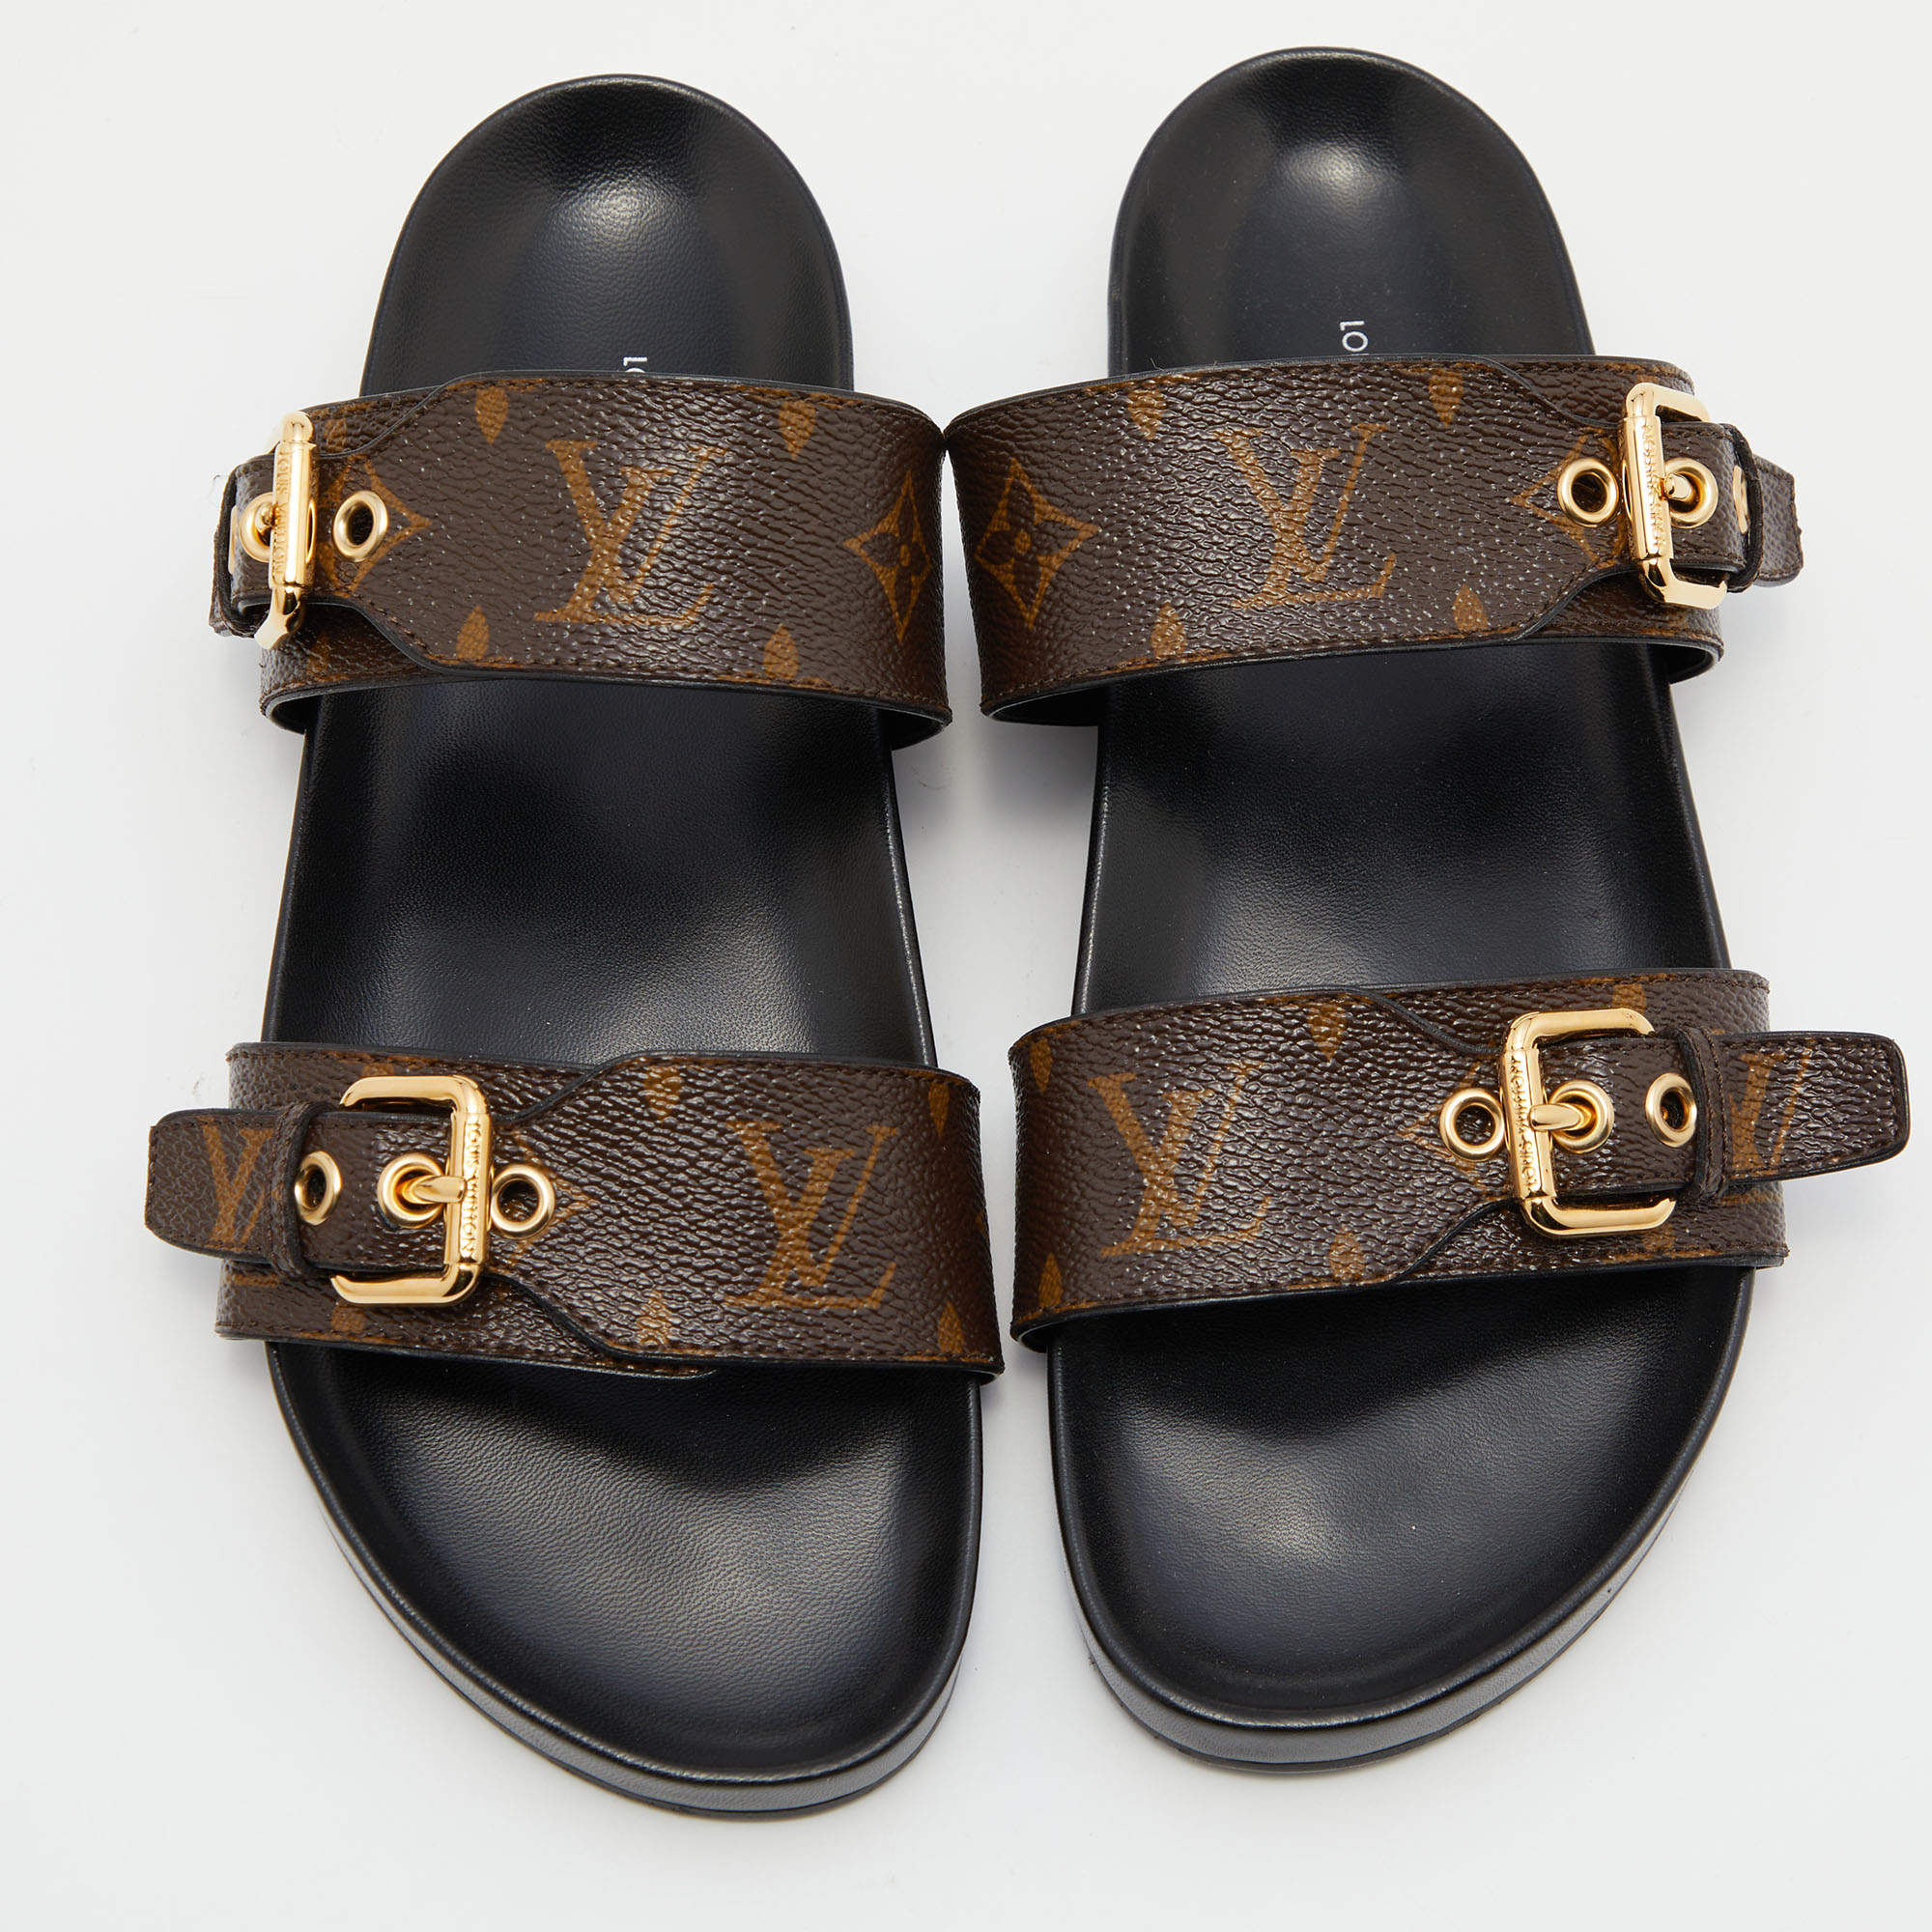 Bom dia leather mules Louis Vuitton Brown size 39 EU in Leather